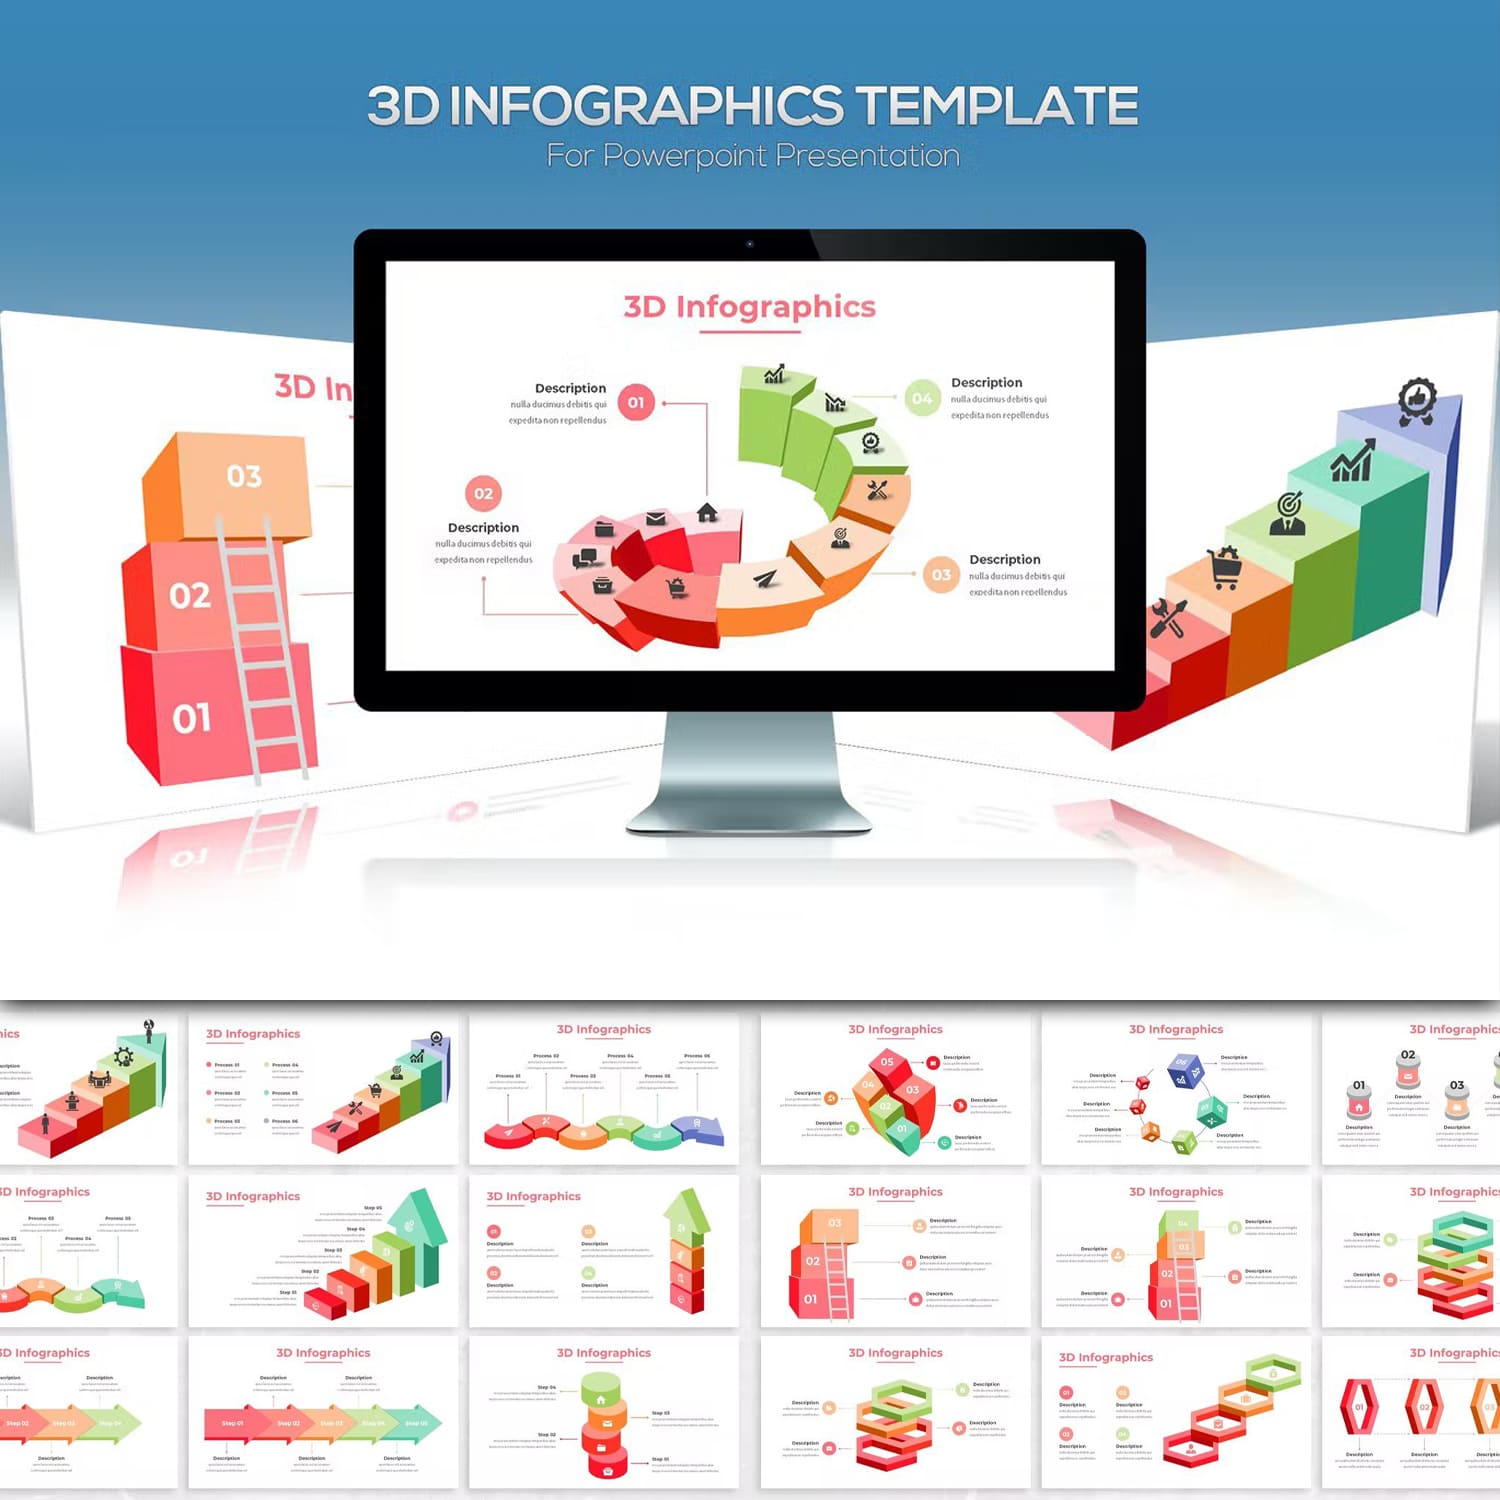 3d infographics for powerpoint presentation - main image preview.